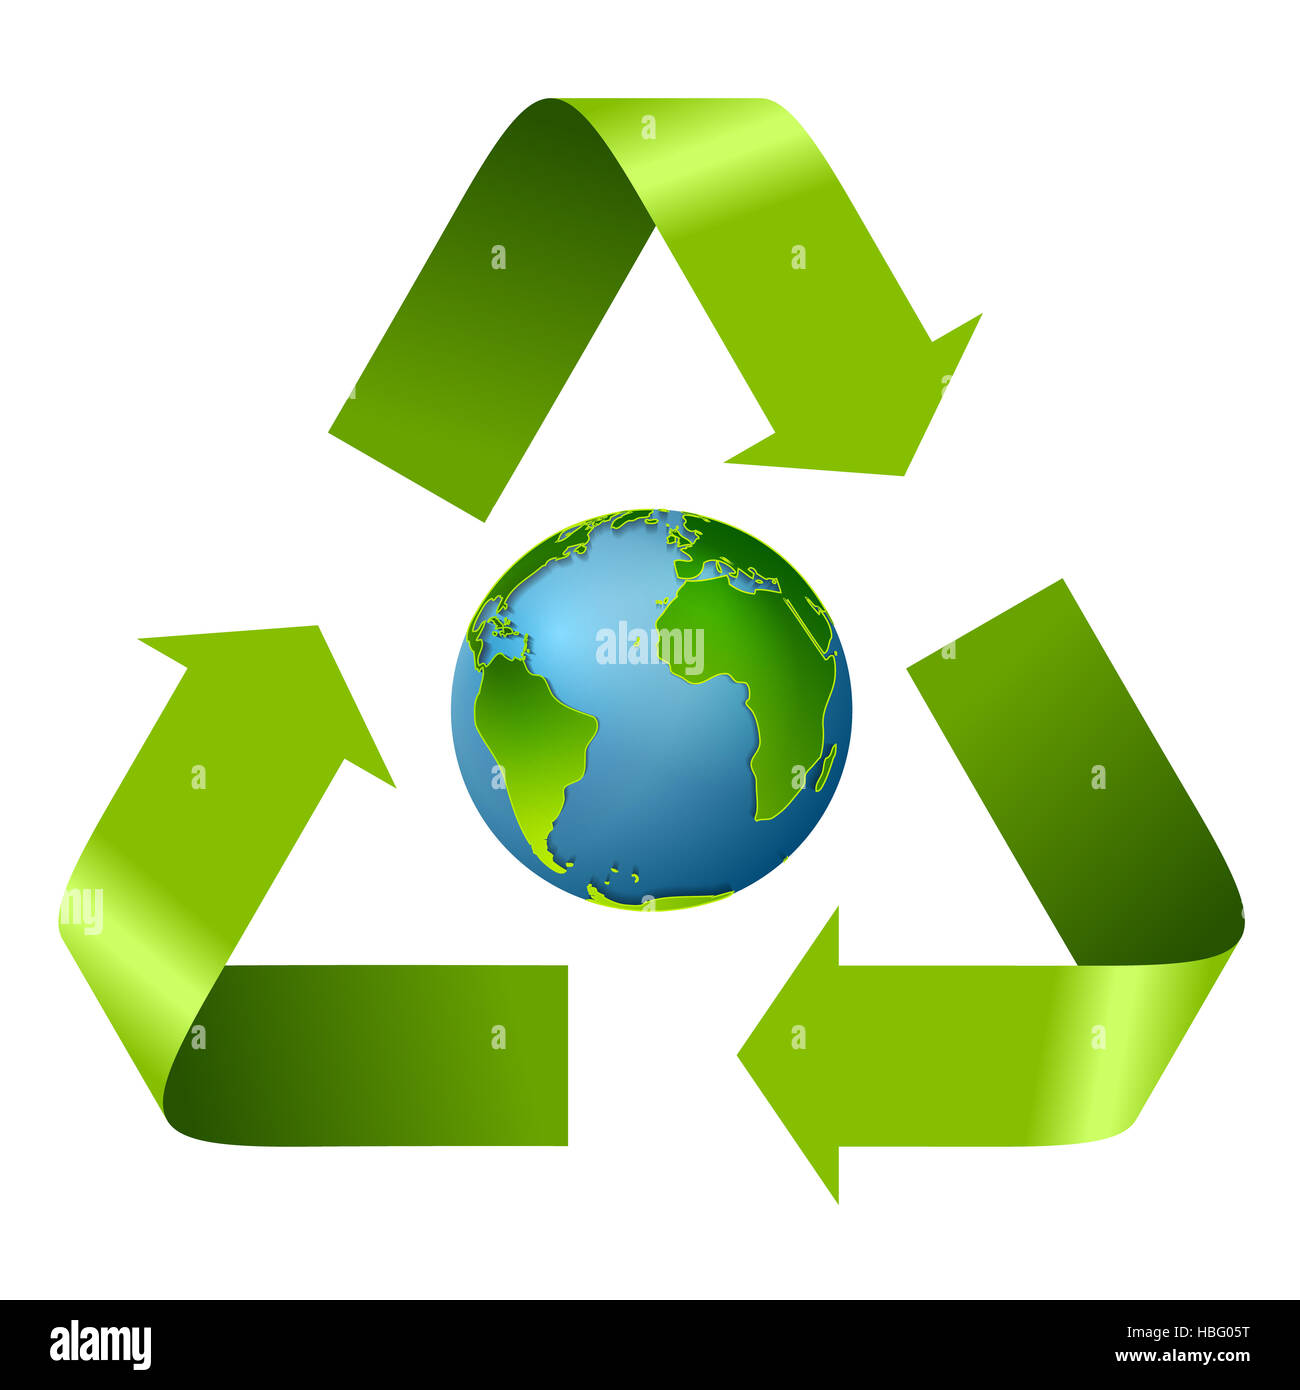 Earth Day design with recycle arrows Stock Photo